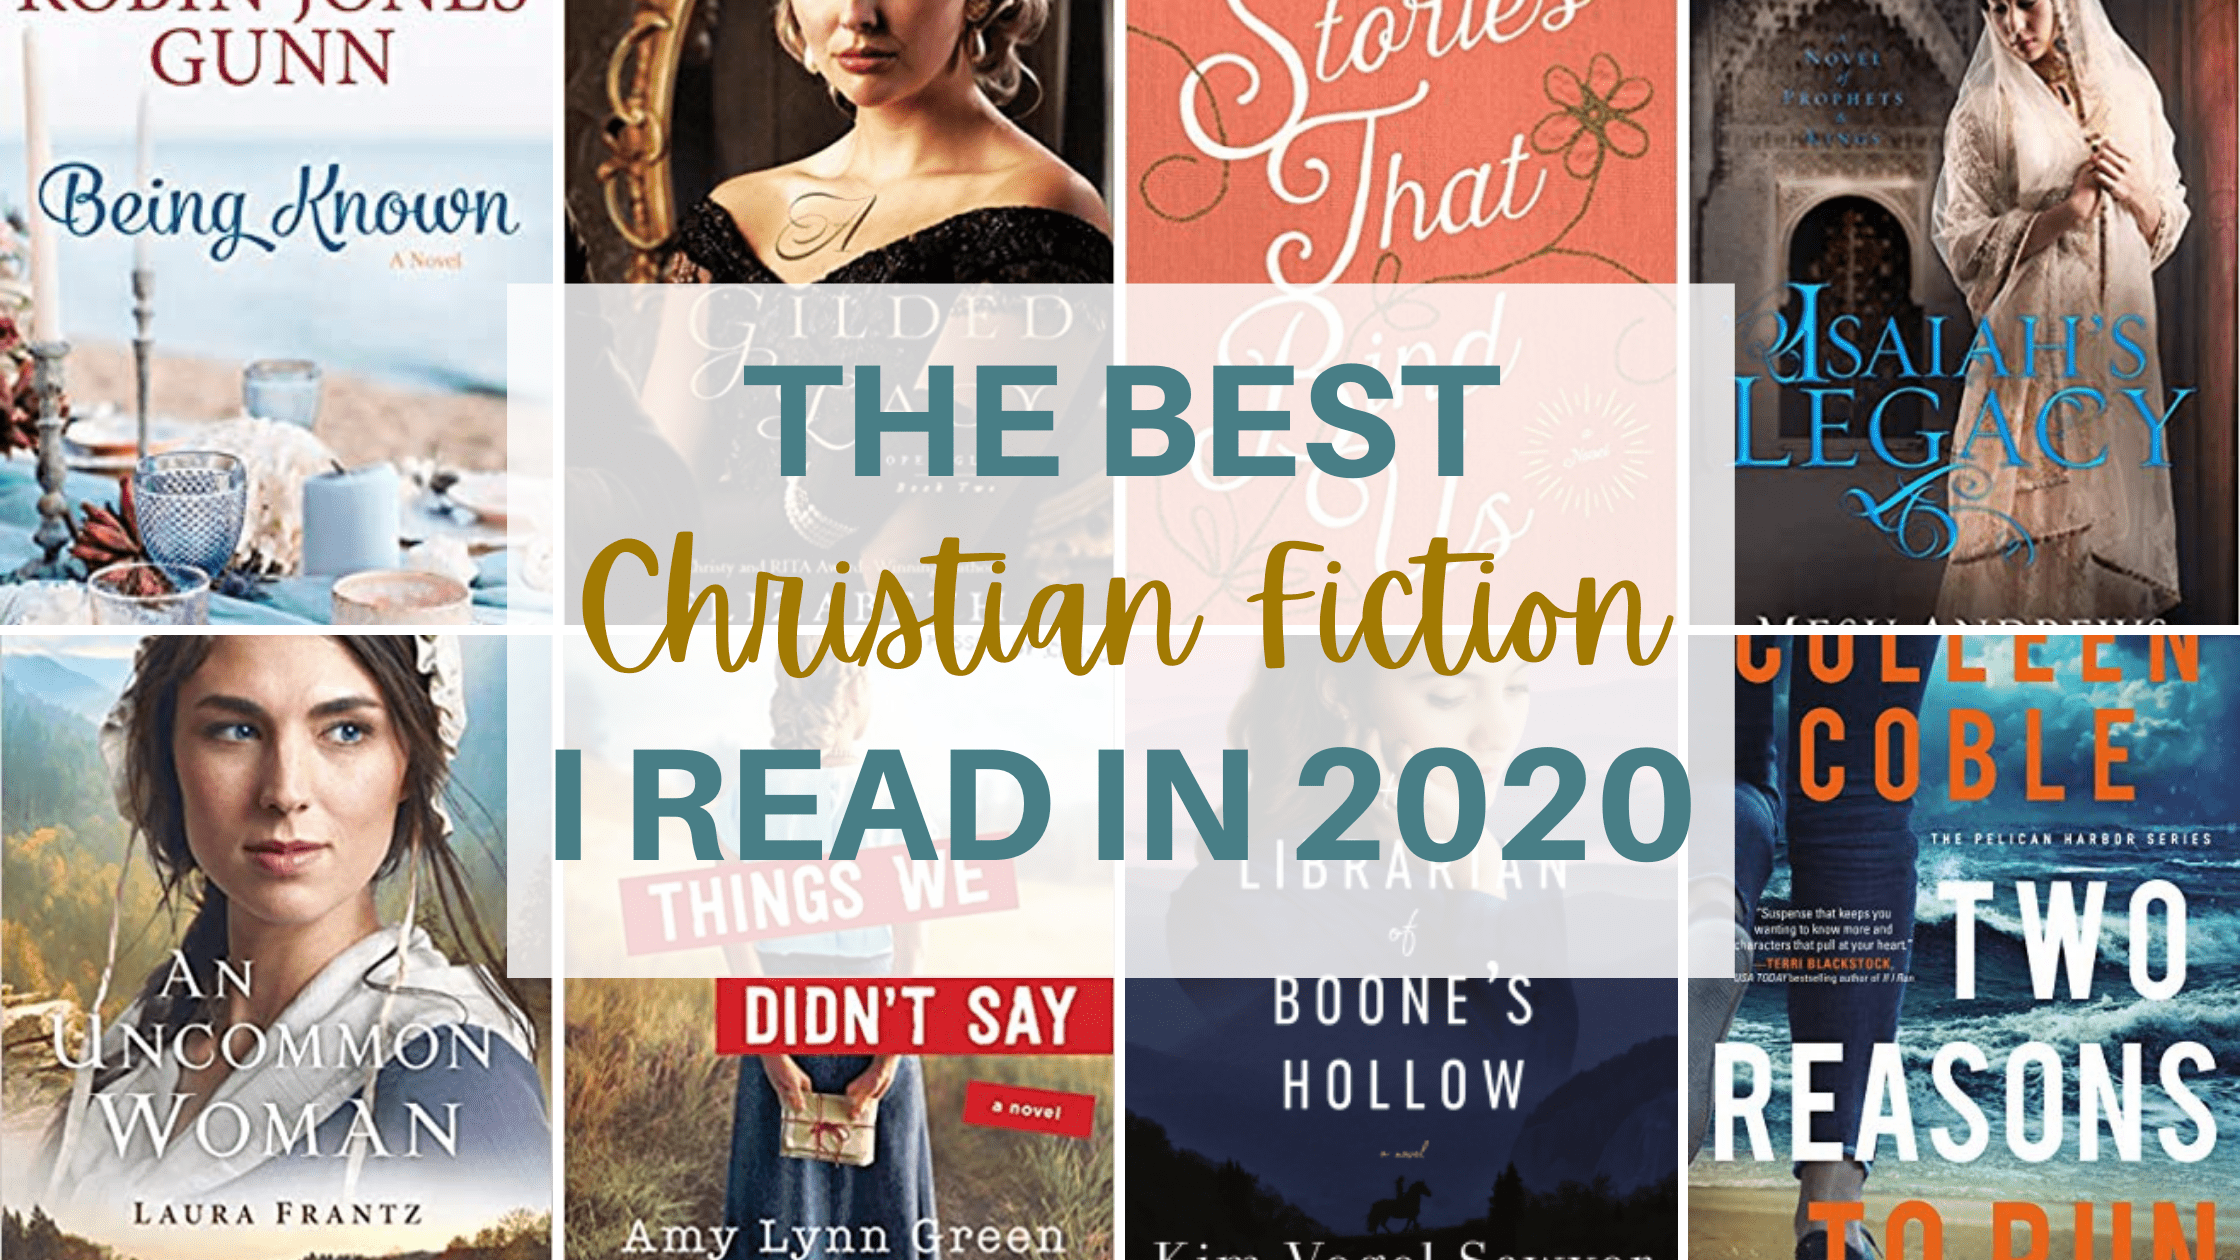 The Best Christian Fiction I Read in 2020